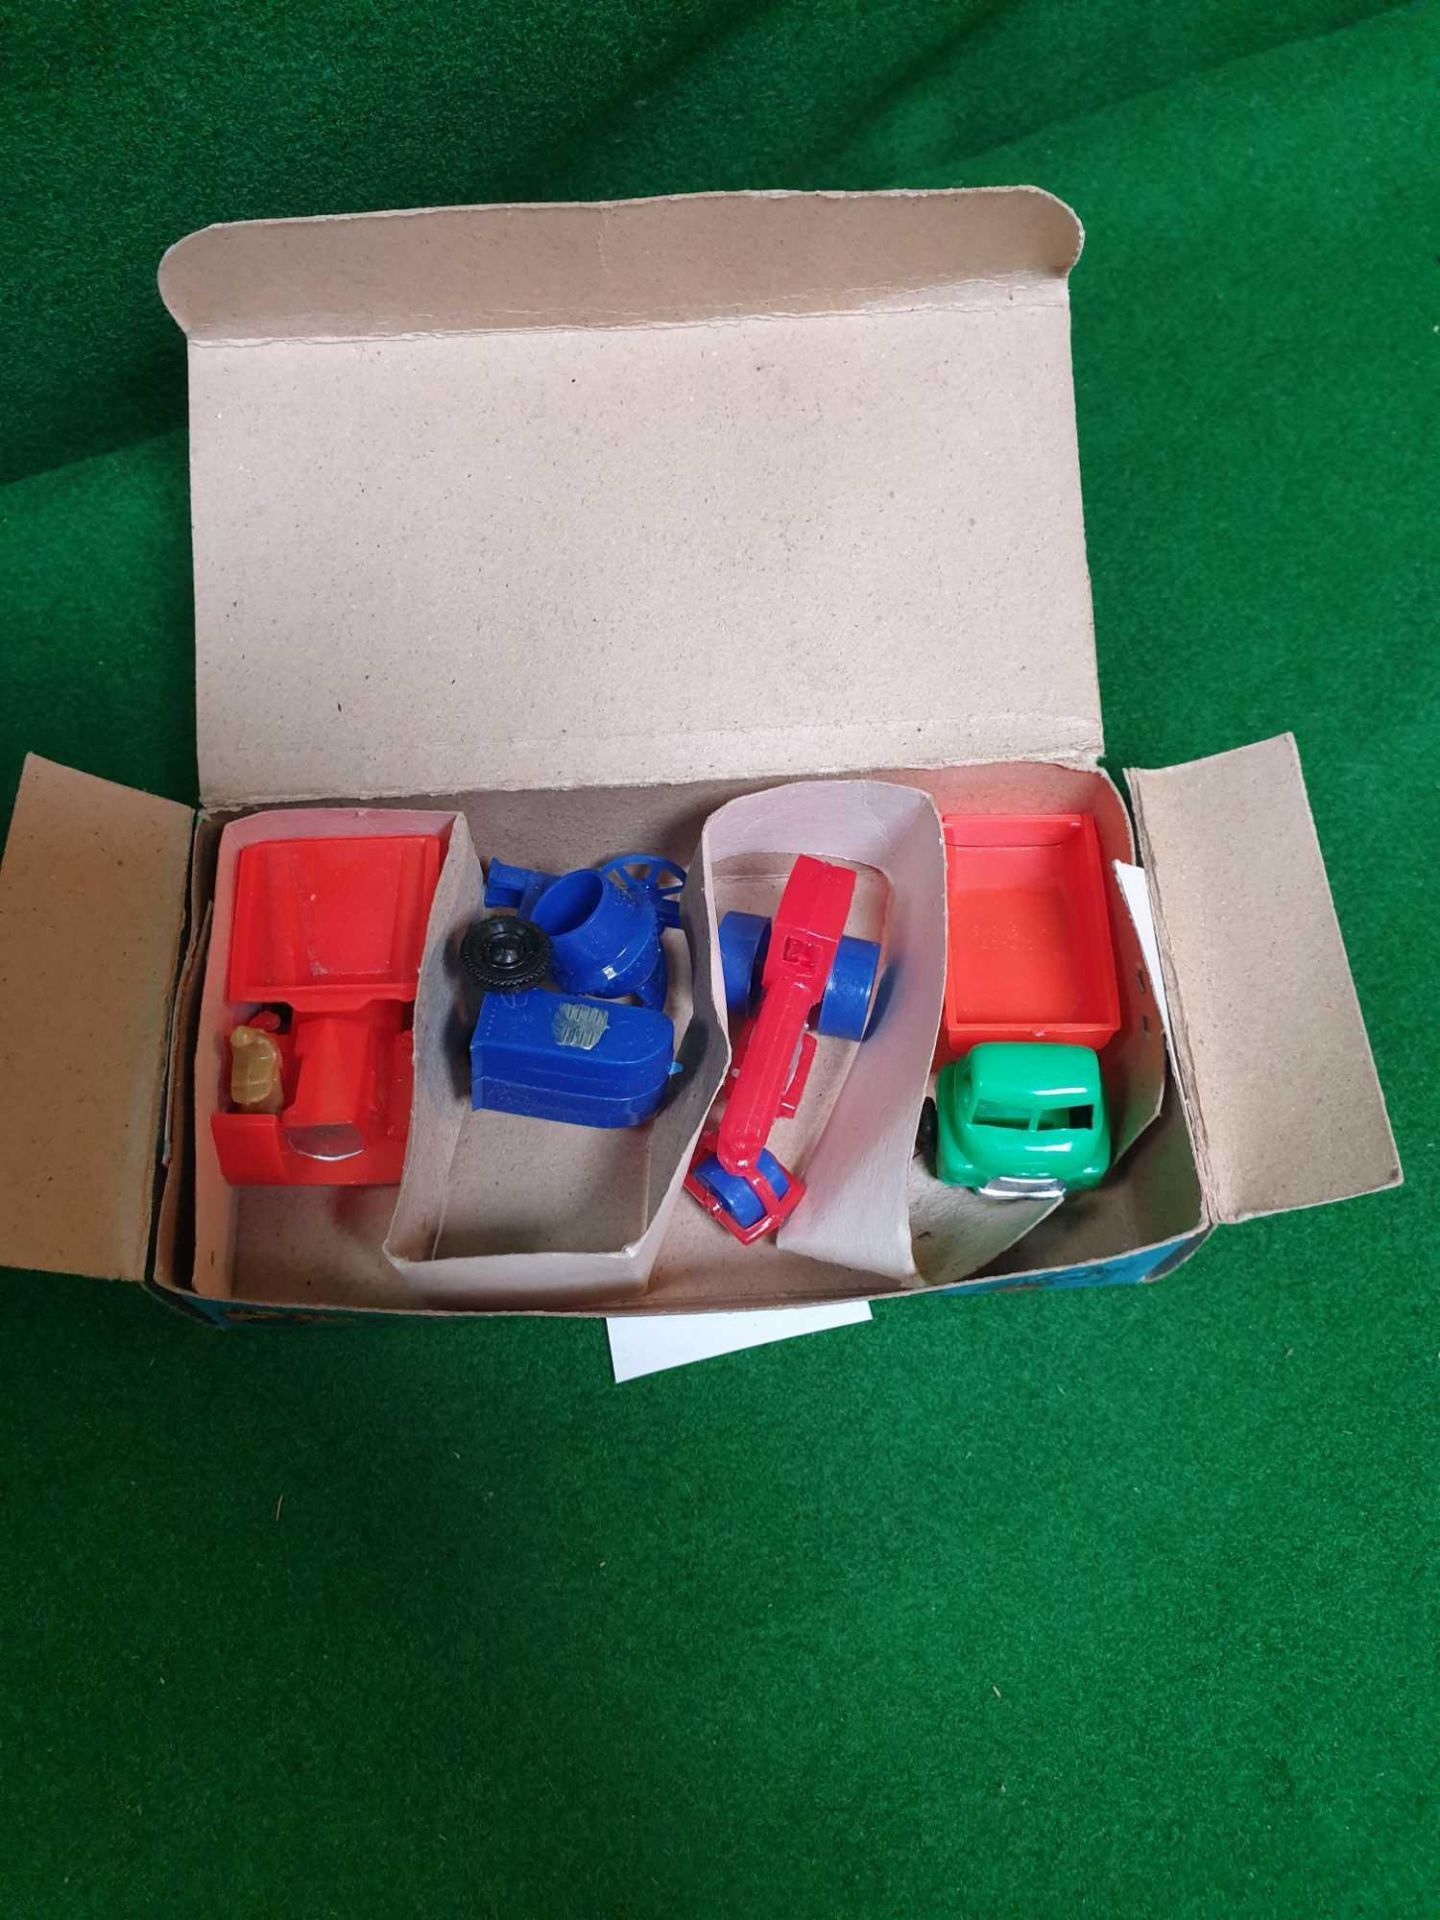 Blue Box Plastic Toy Car Series Civil Engineering Series No. # 7404 With 4 Vehicles In Box Rare - Image 2 of 2